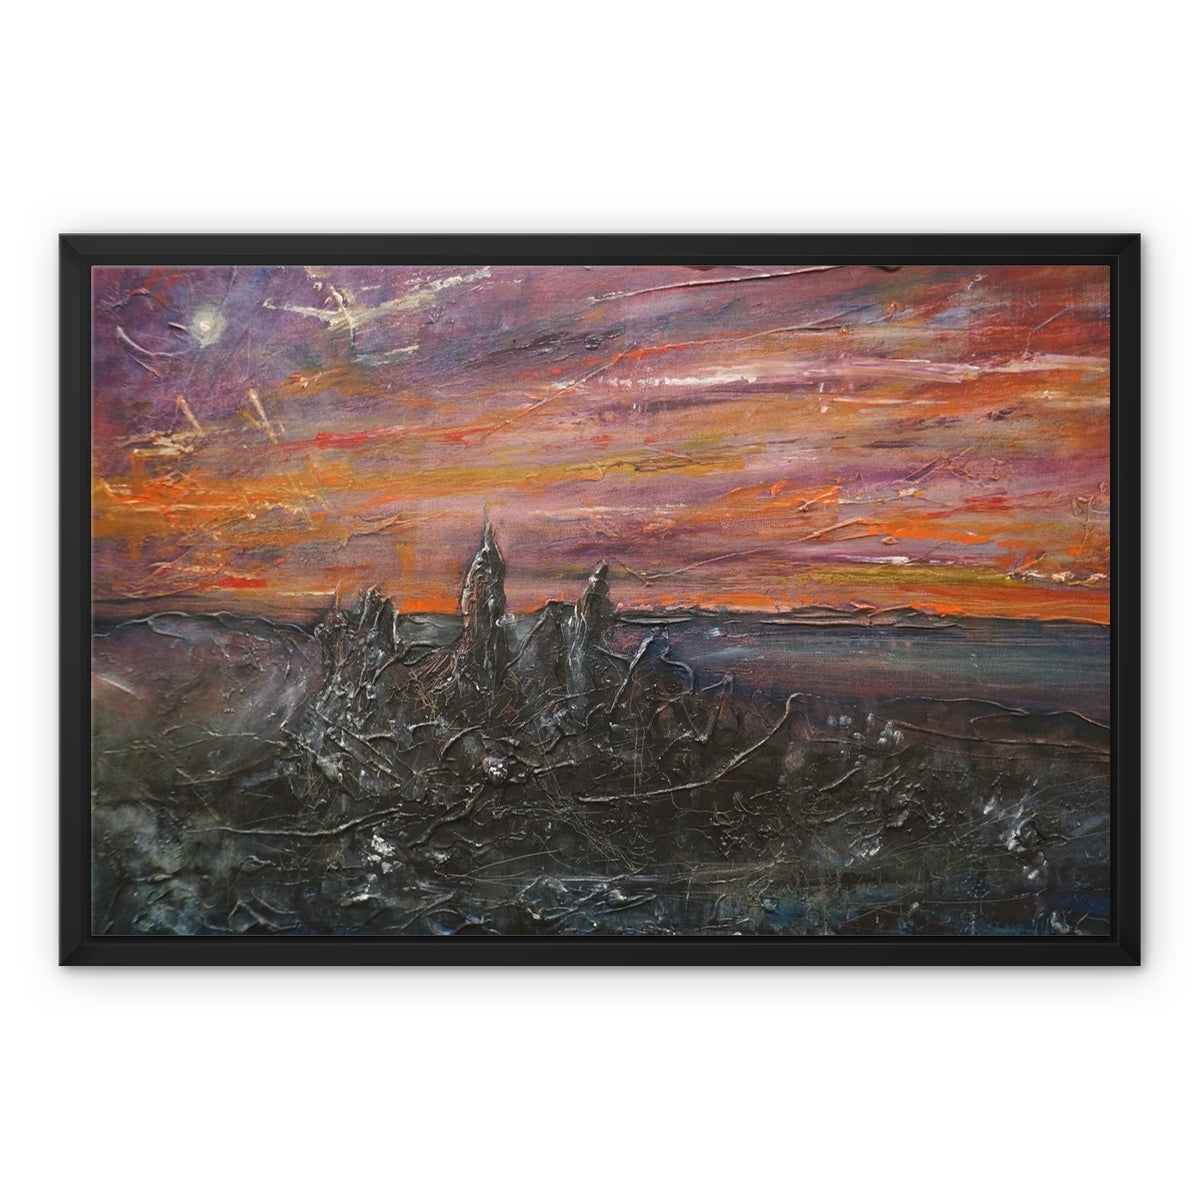 Storr Moonlight Skye Painting | Framed Canvas From Scotland-Floating Framed Canvas Prints-Skye Art Gallery-24"x18"-Black Frame-Paintings, Prints, Homeware, Art Gifts From Scotland By Scottish Artist Kevin Hunter